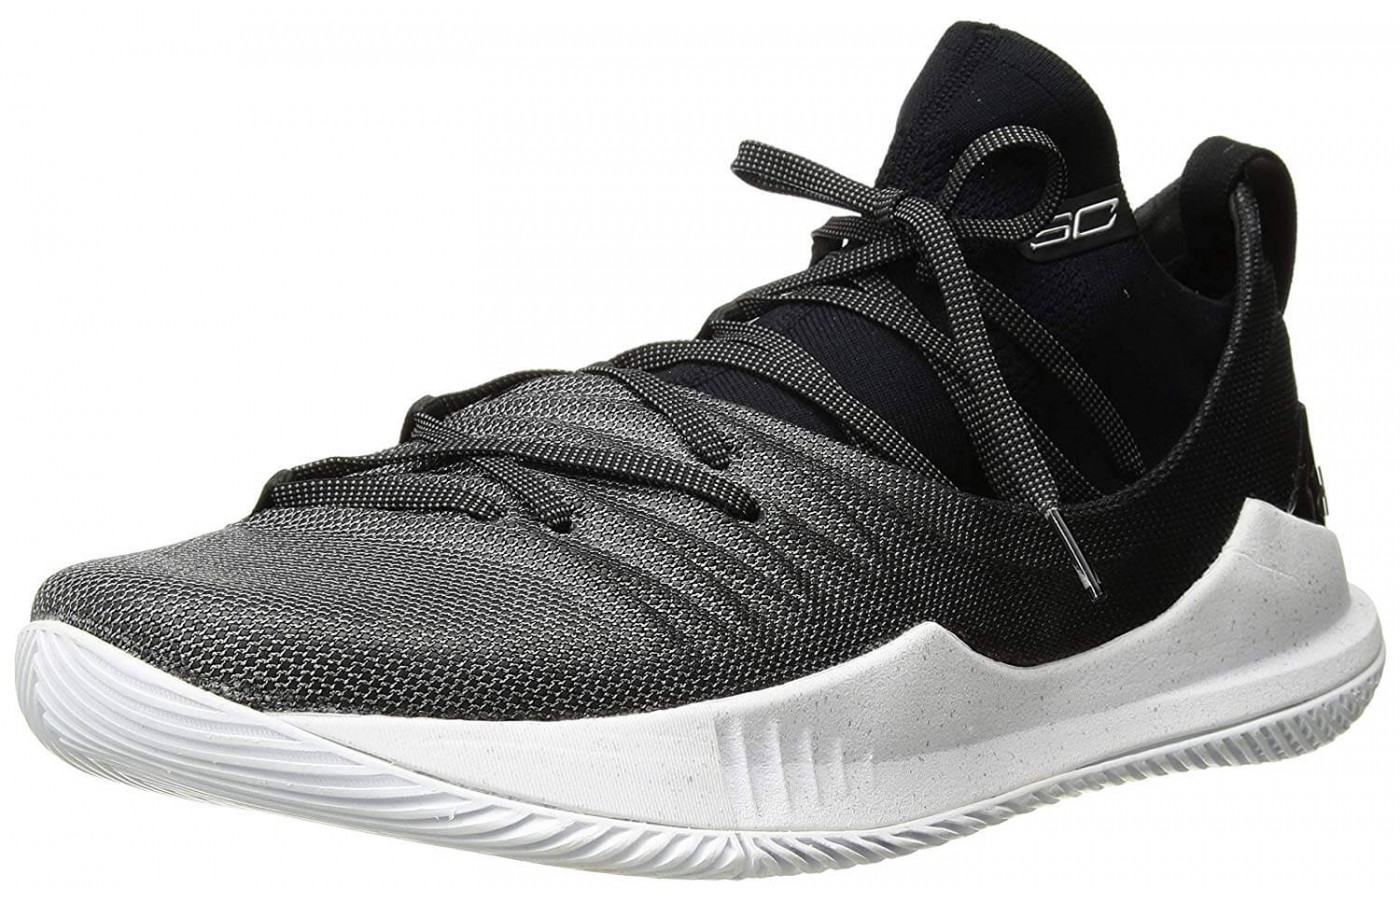 Under Armour Curry 5 Reviewed \u0026 Rated 